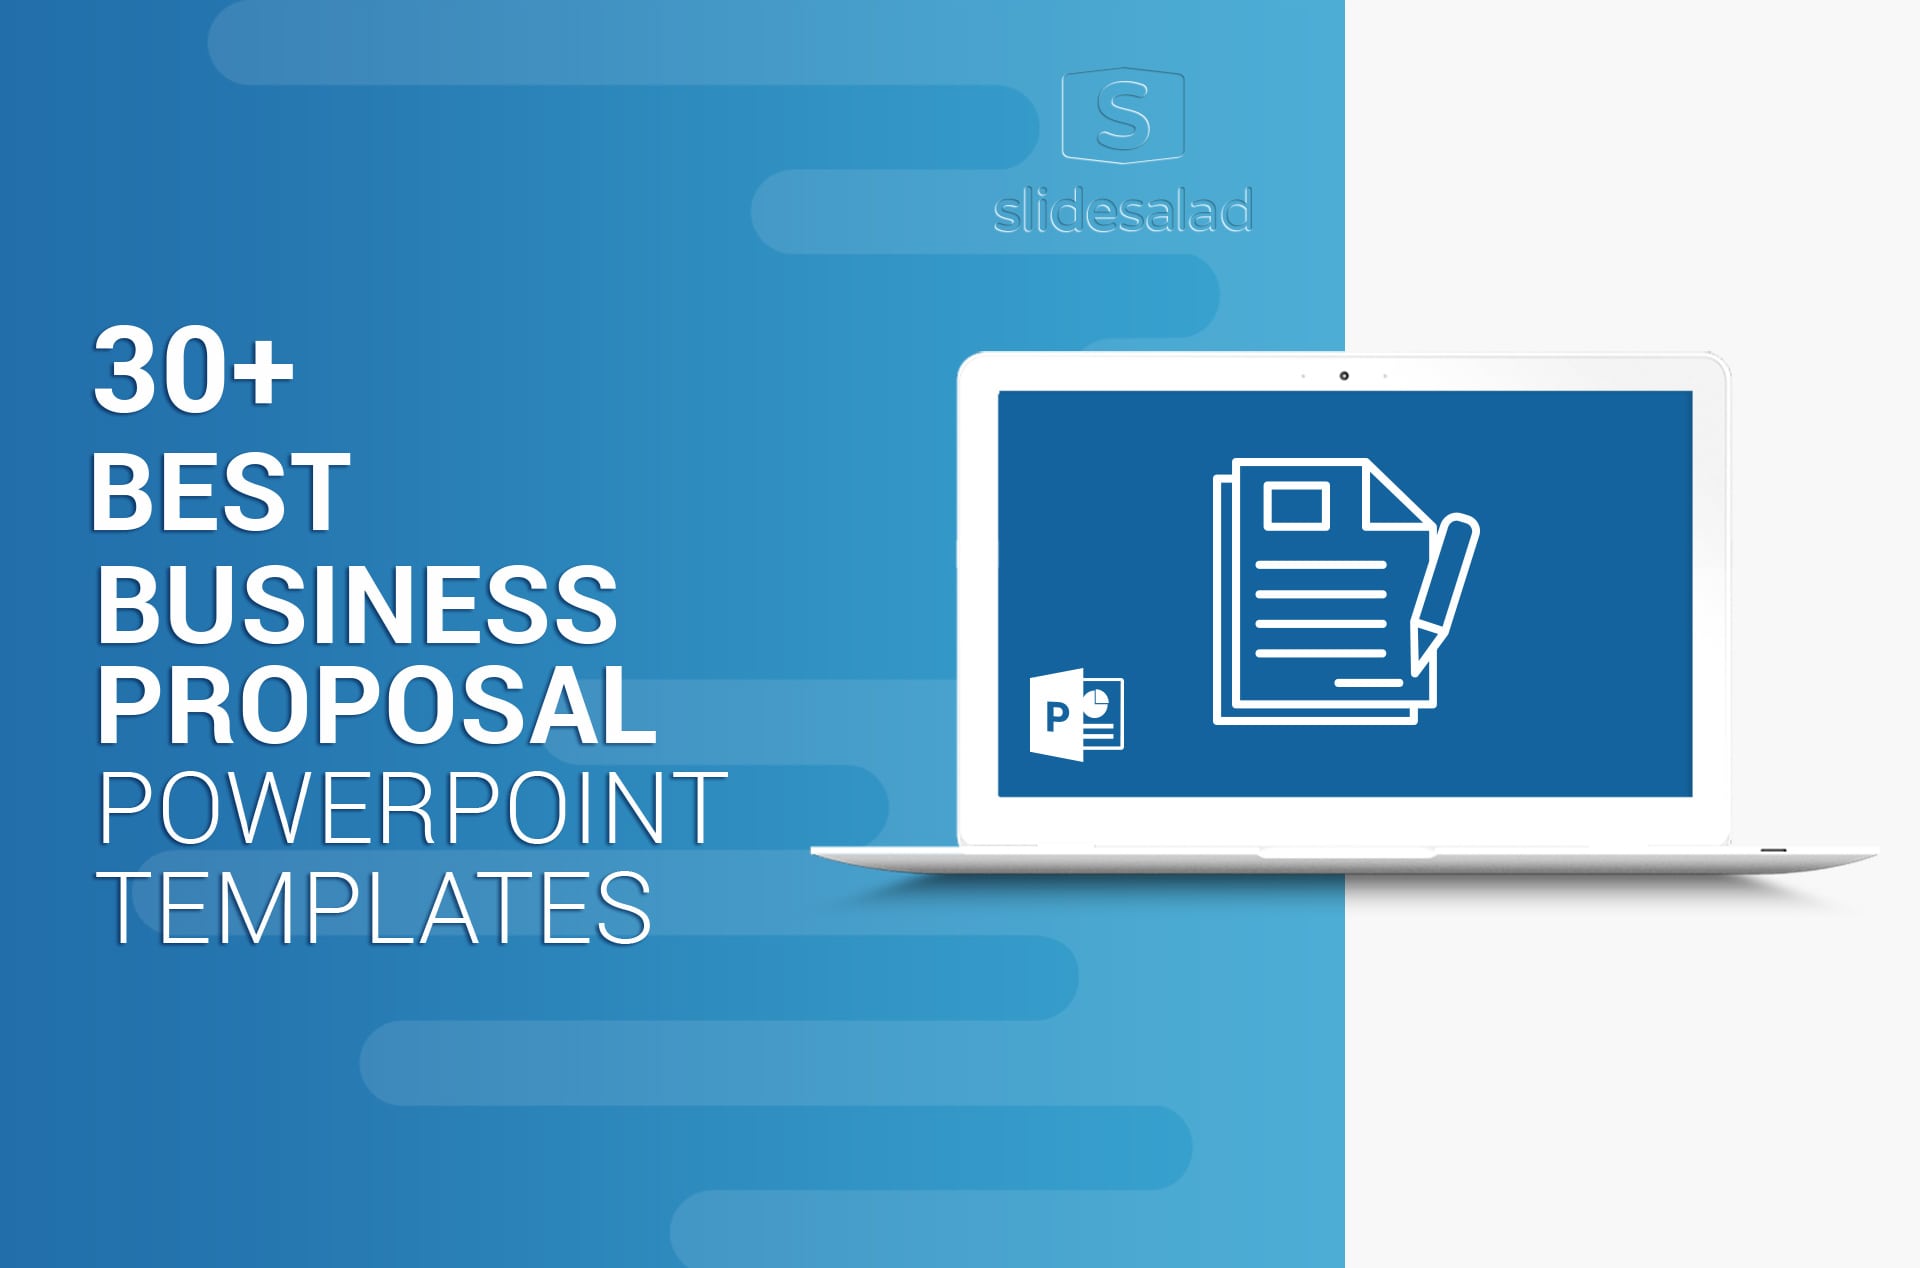 30+ Best PowerPoint Proposal Templates for Business PPT Presentations